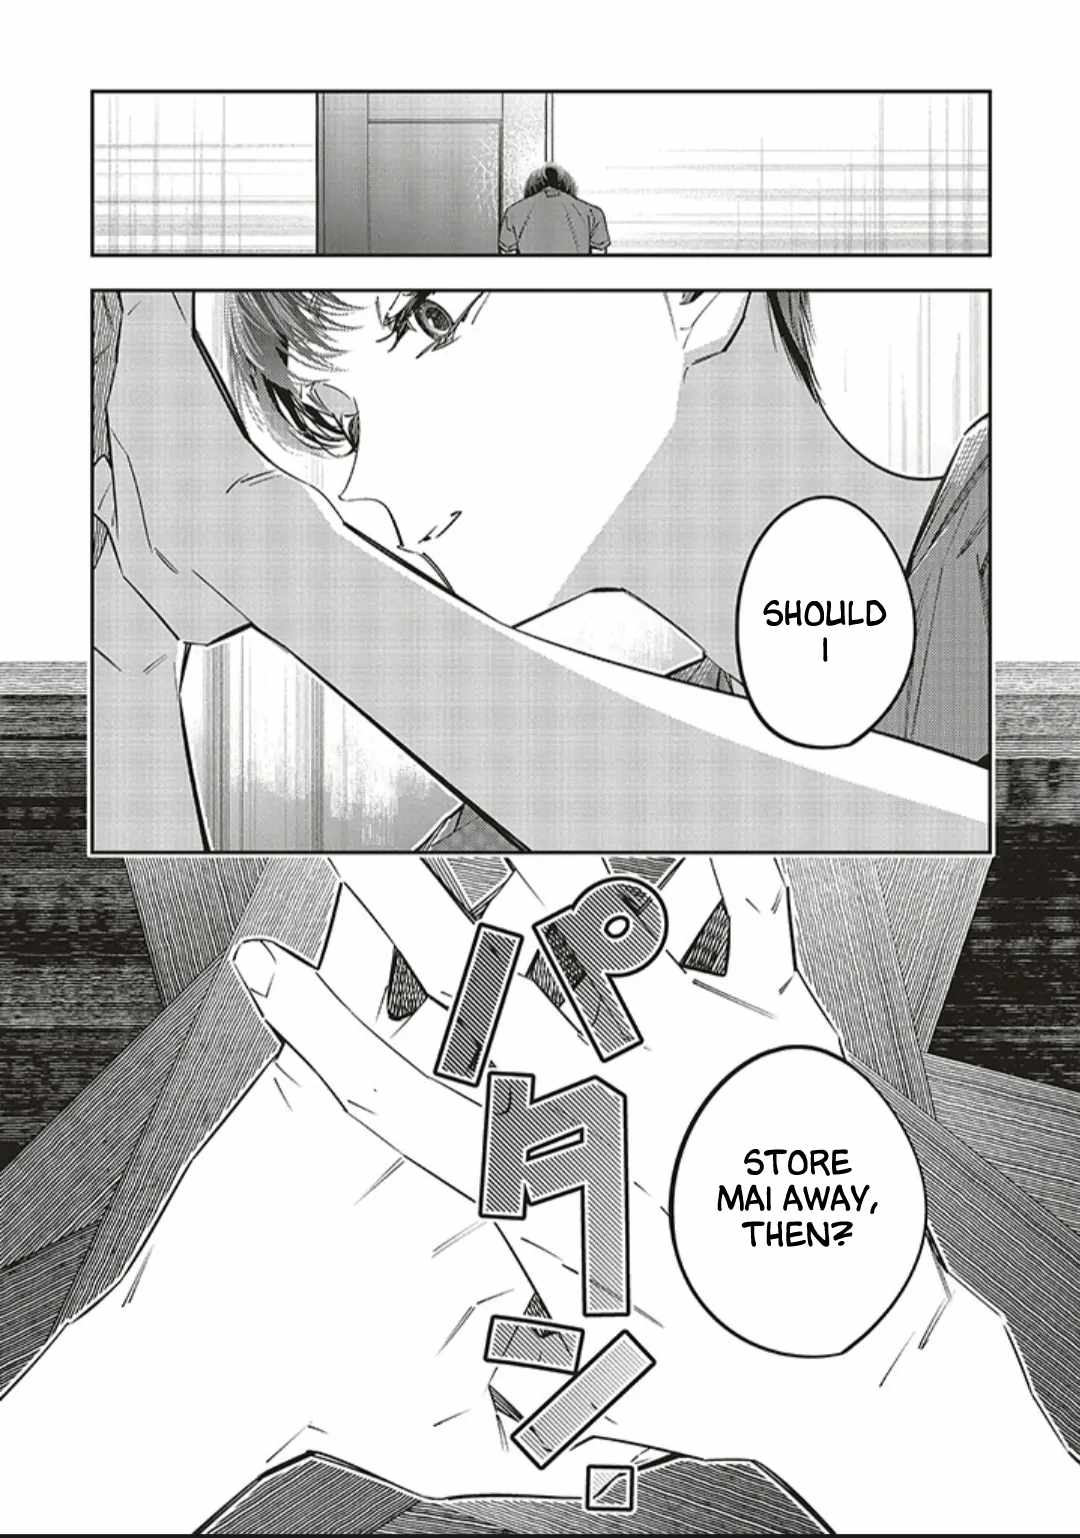 I Reincarnated as the Little Sister of a Death Game Manga's Murd3r Mastermind and Failed Chapter 18